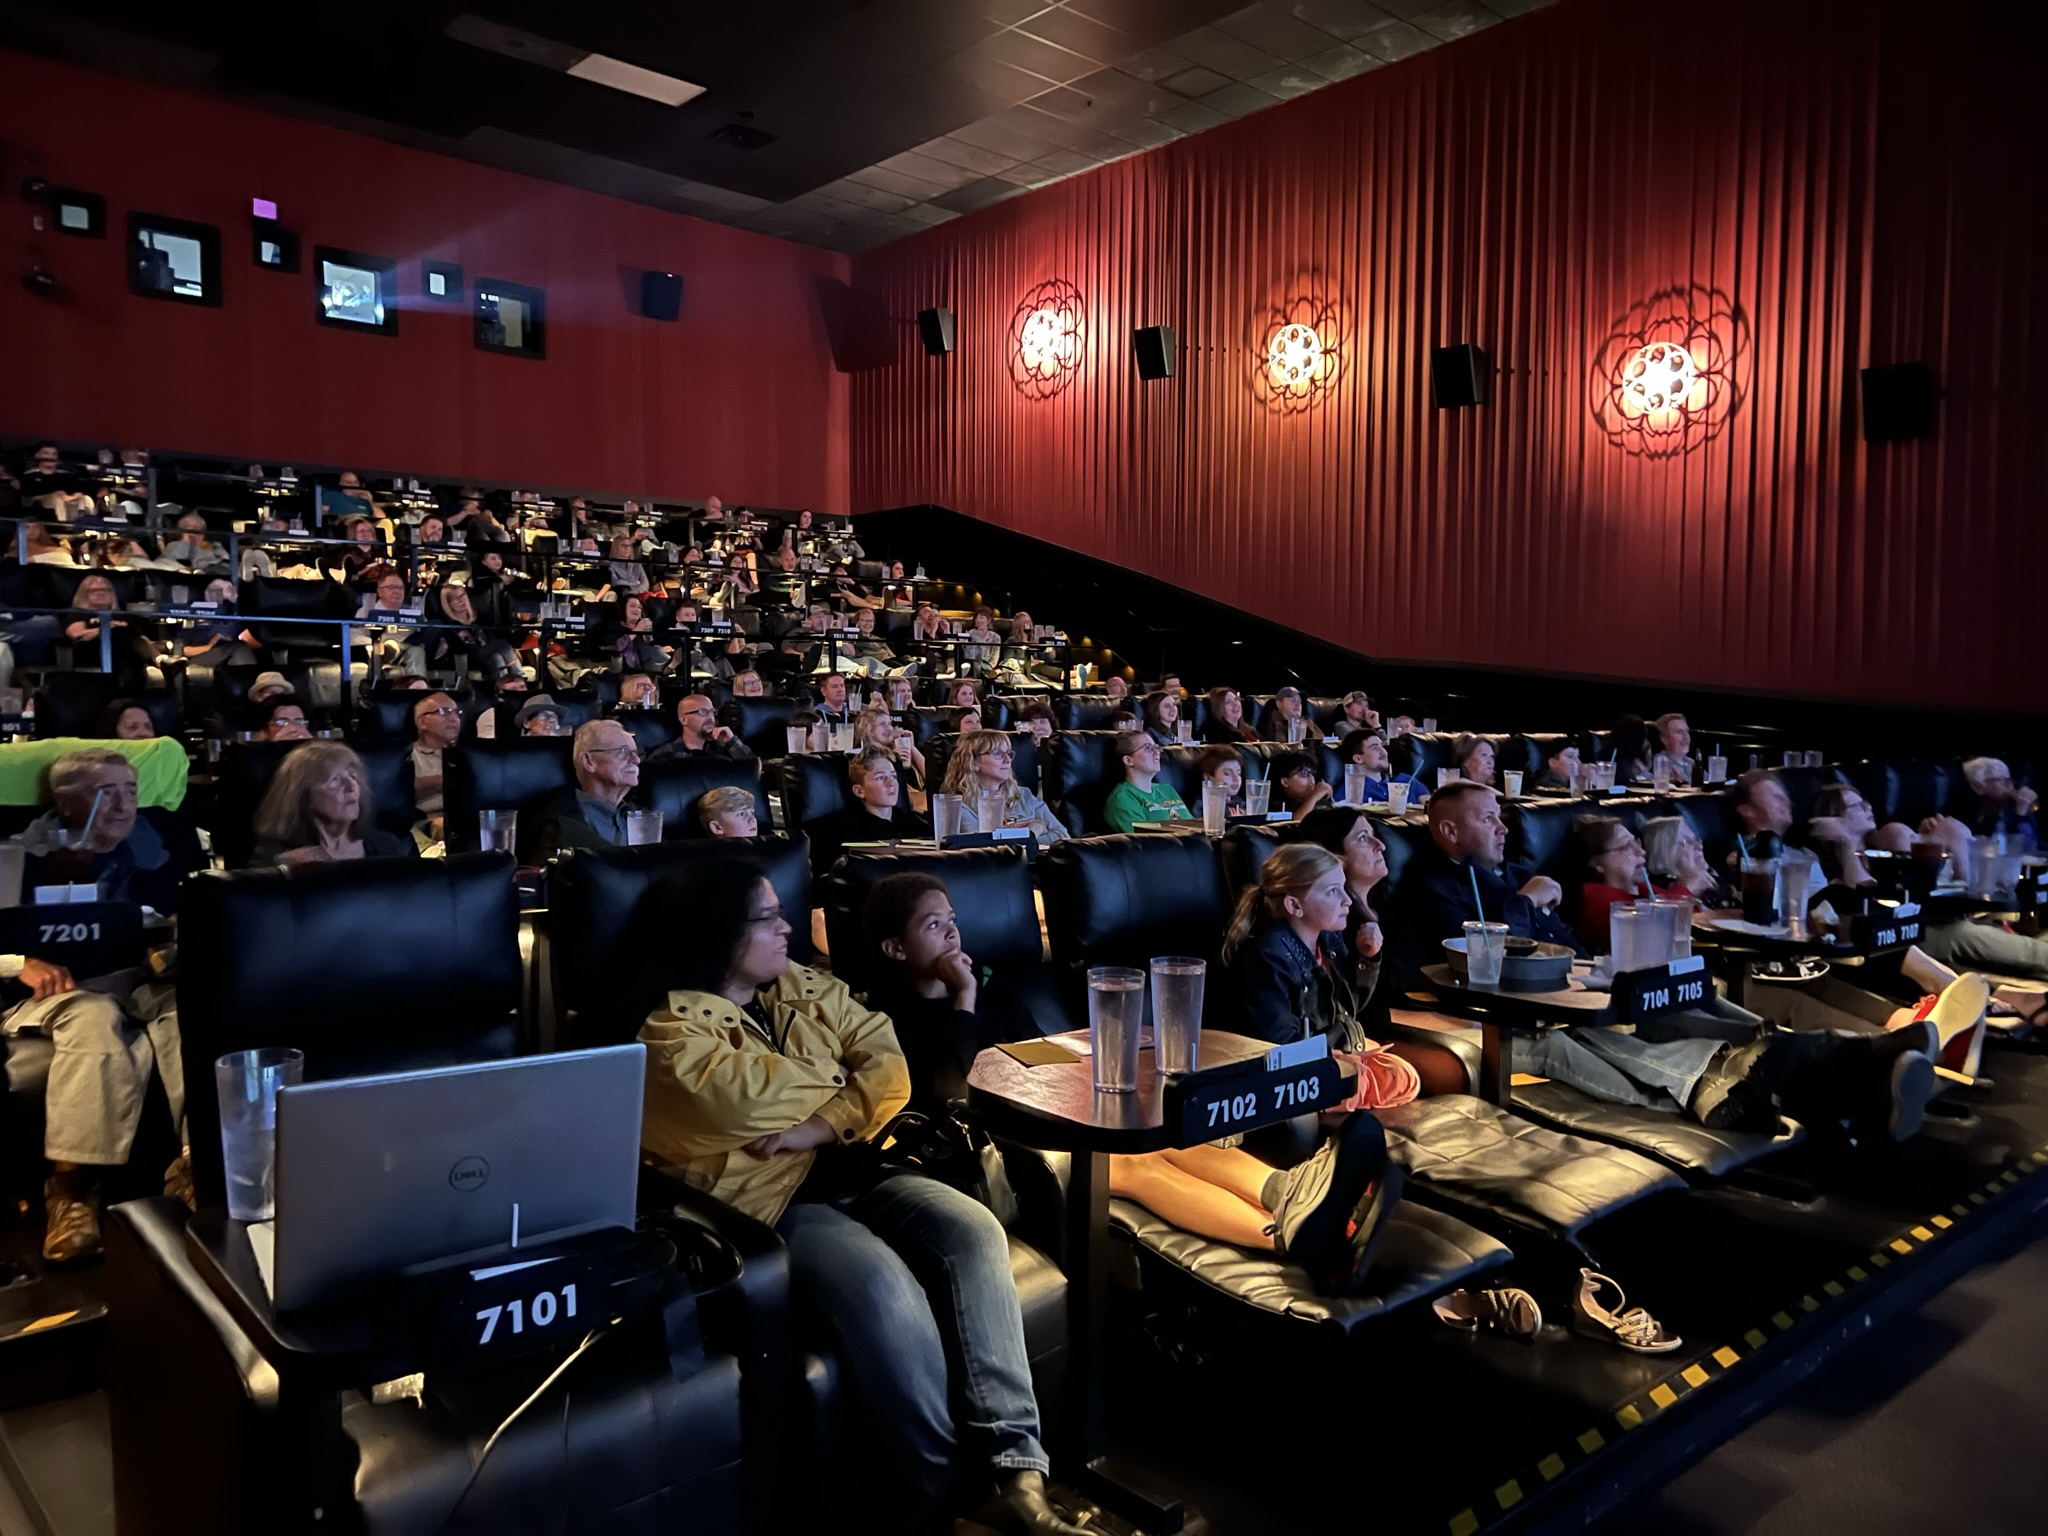 People sit in a movie theatre, watching a film